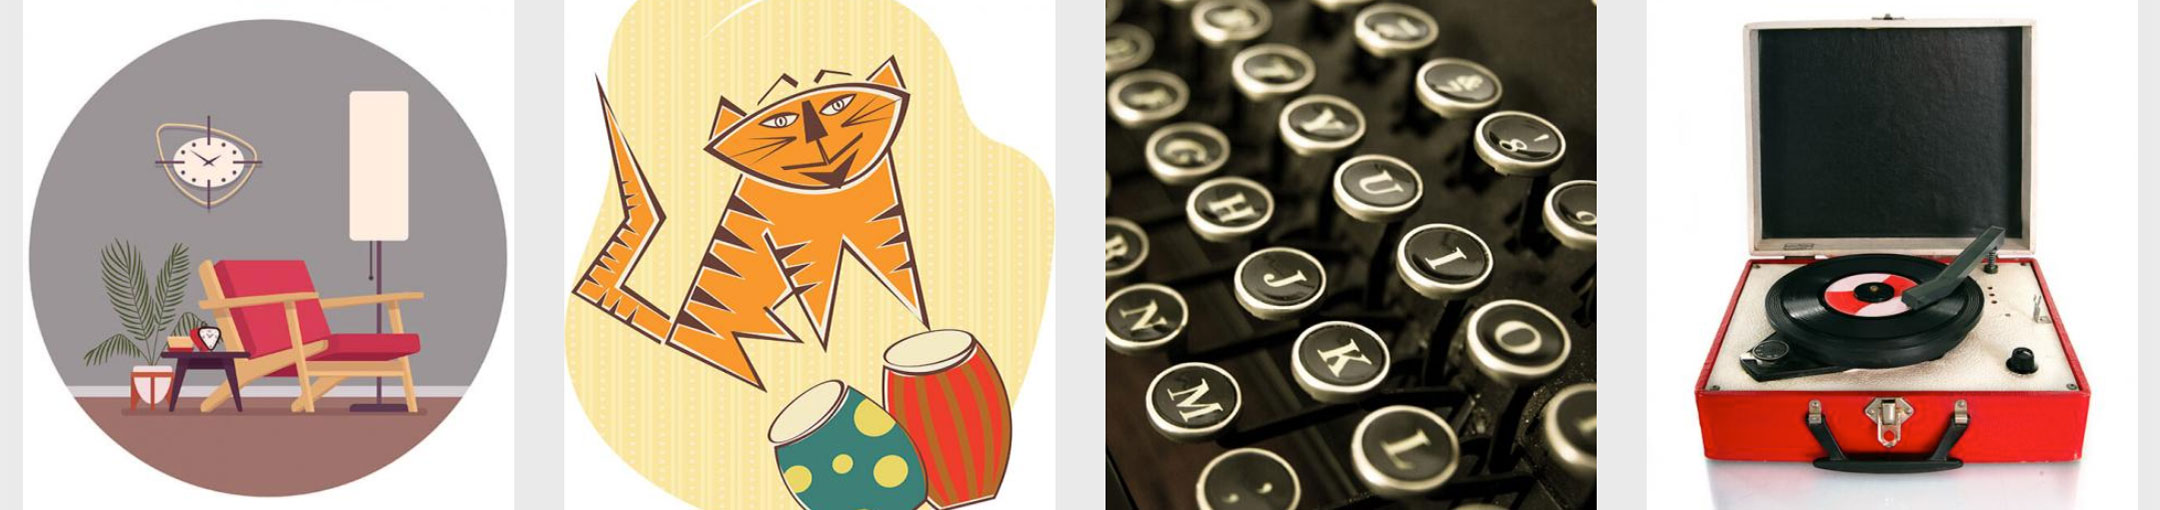 A collage of 4 images; chair, cat, typewriter keys, record player.